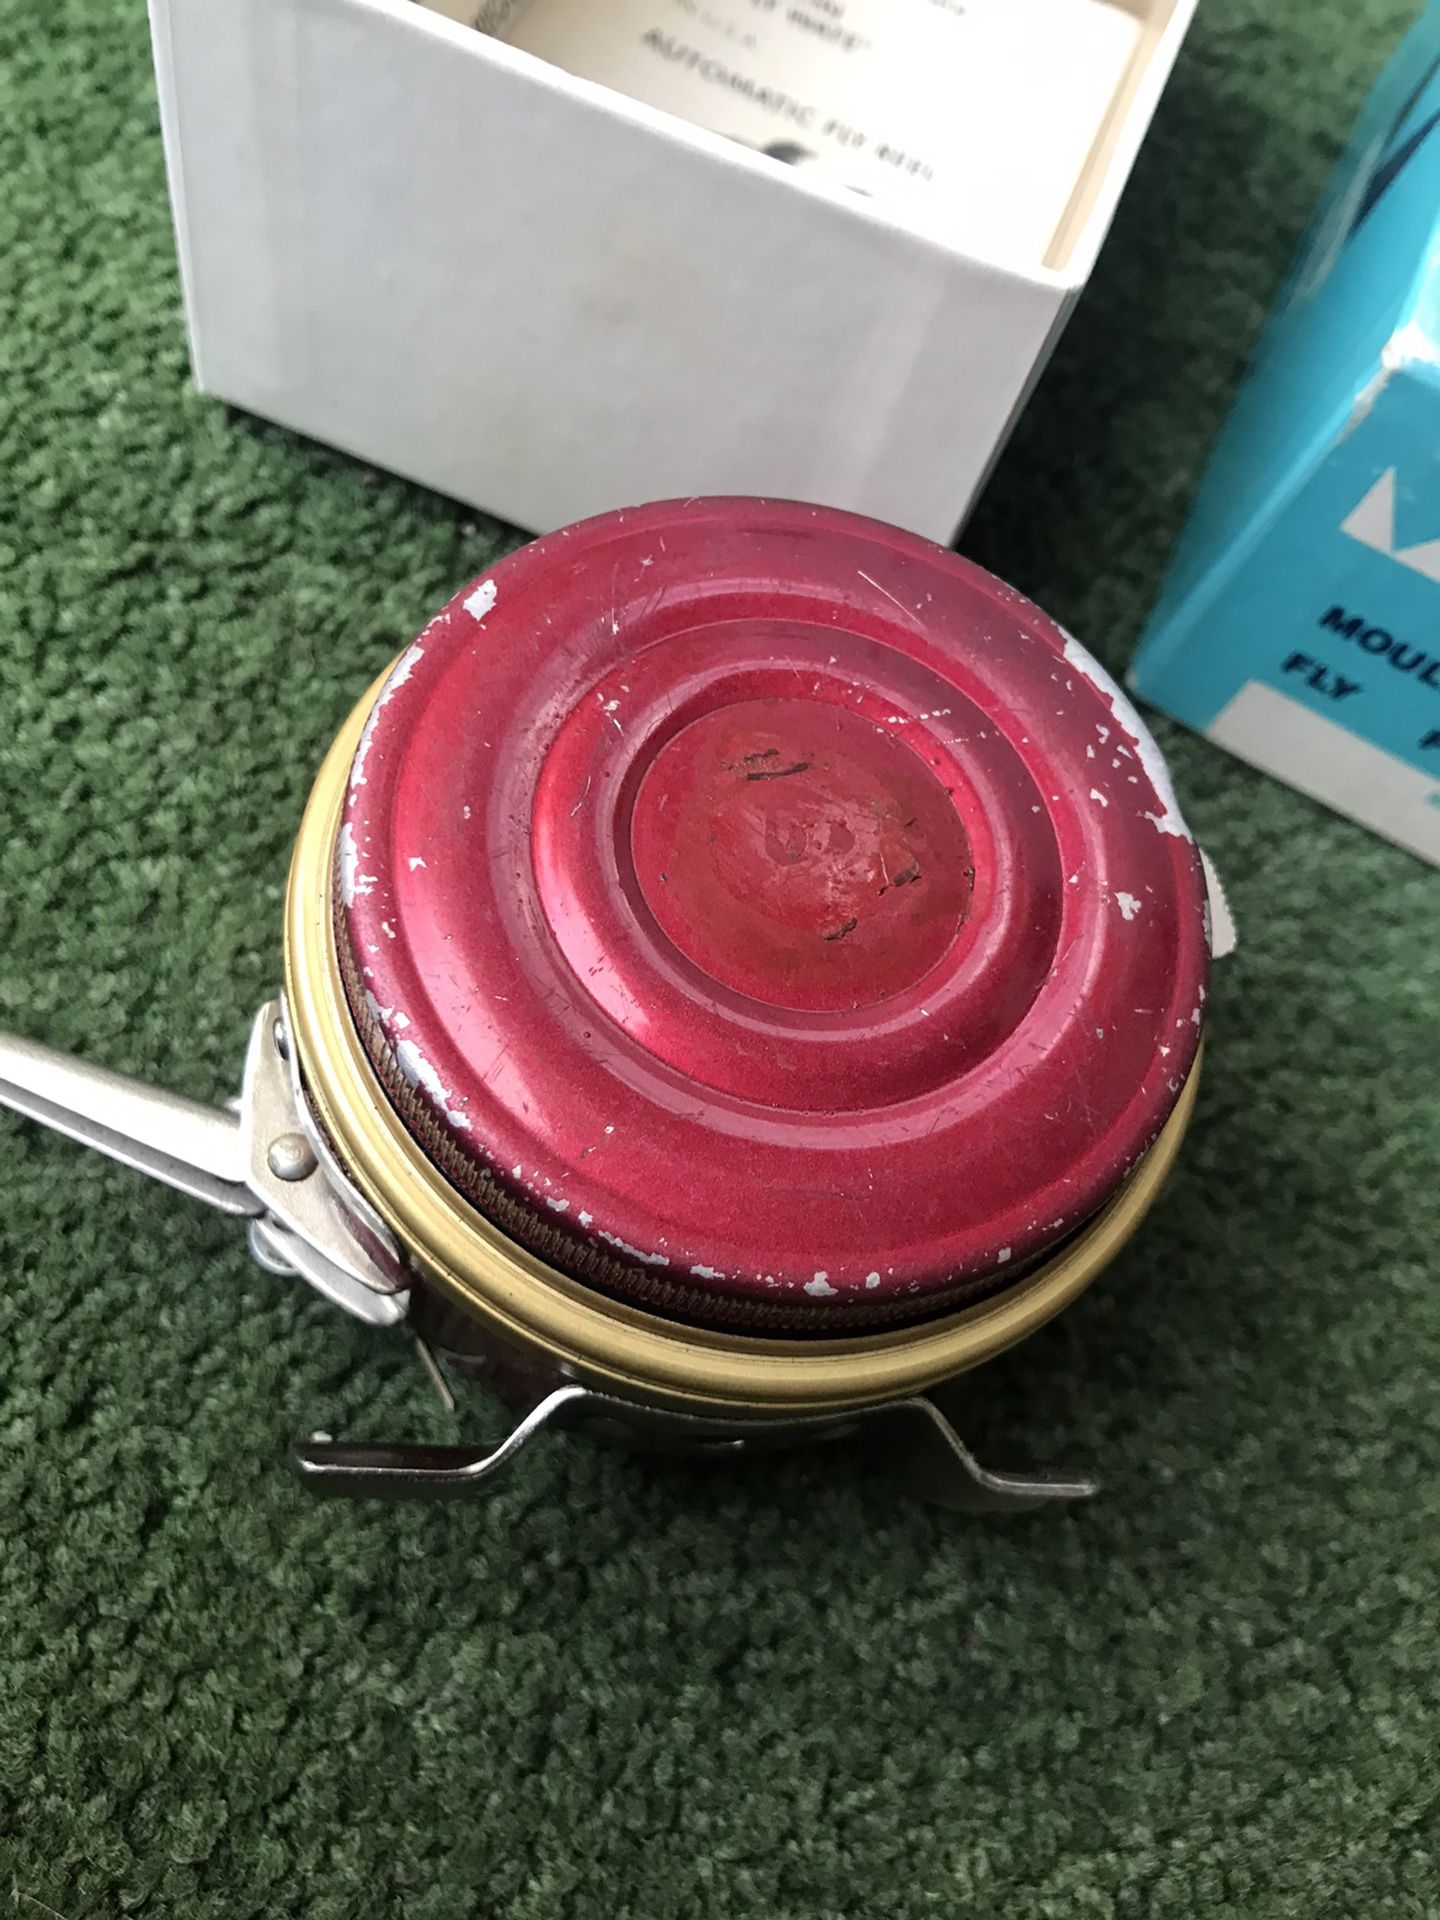 Vintage Martin Fly Fishing Reel With Box for Sale in Chula Vista, CA -  OfferUp